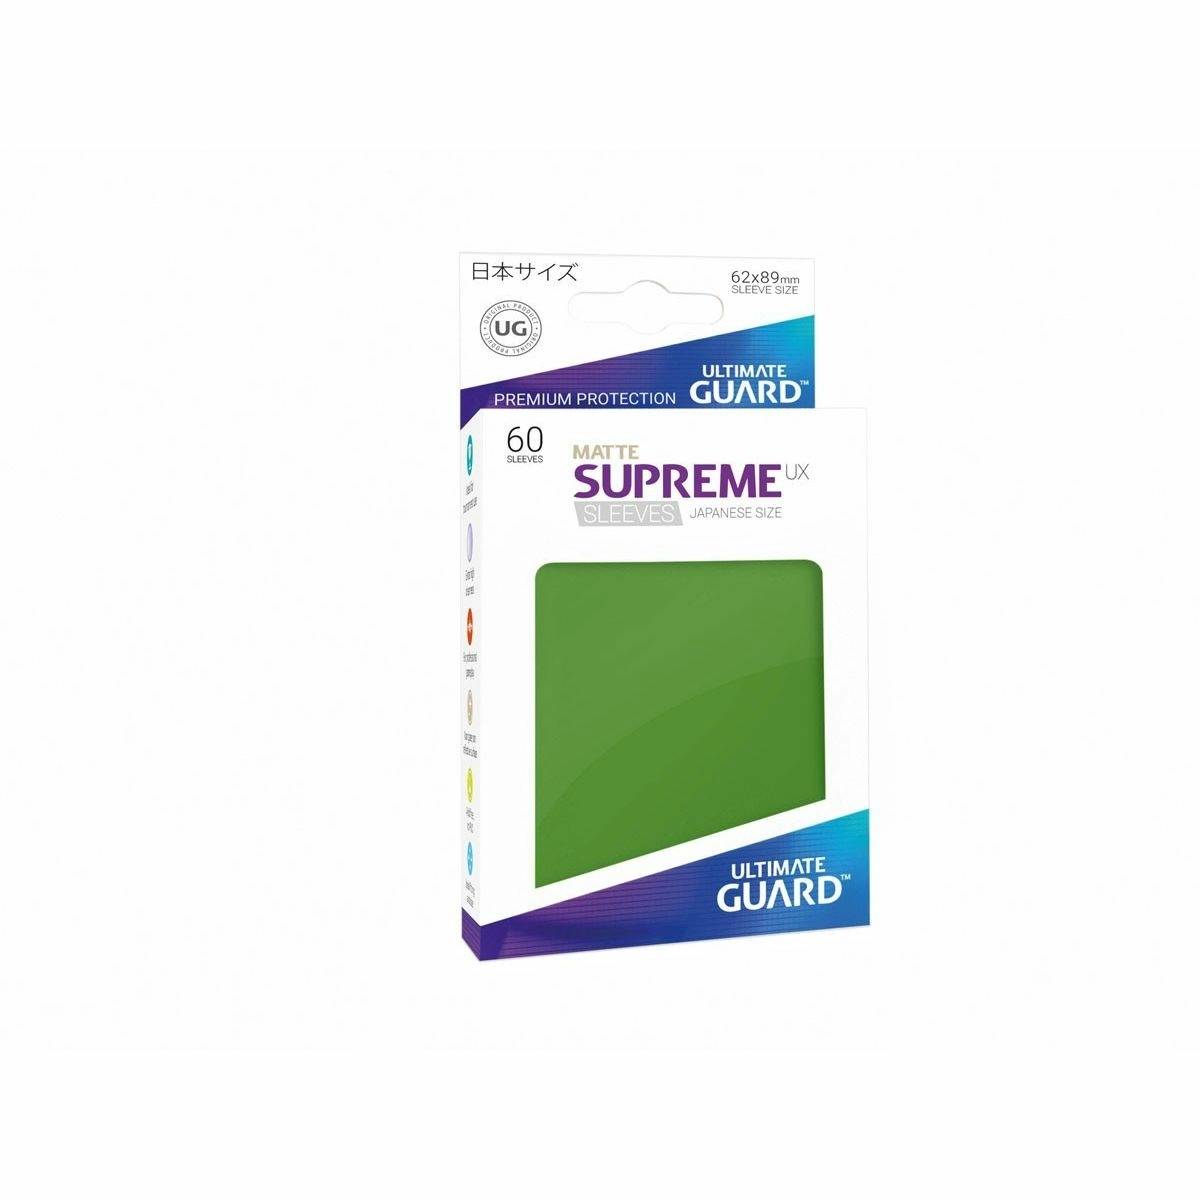 Ultimate Guard - Supreme UX Japanese Size Sleeves Matte Green (60)